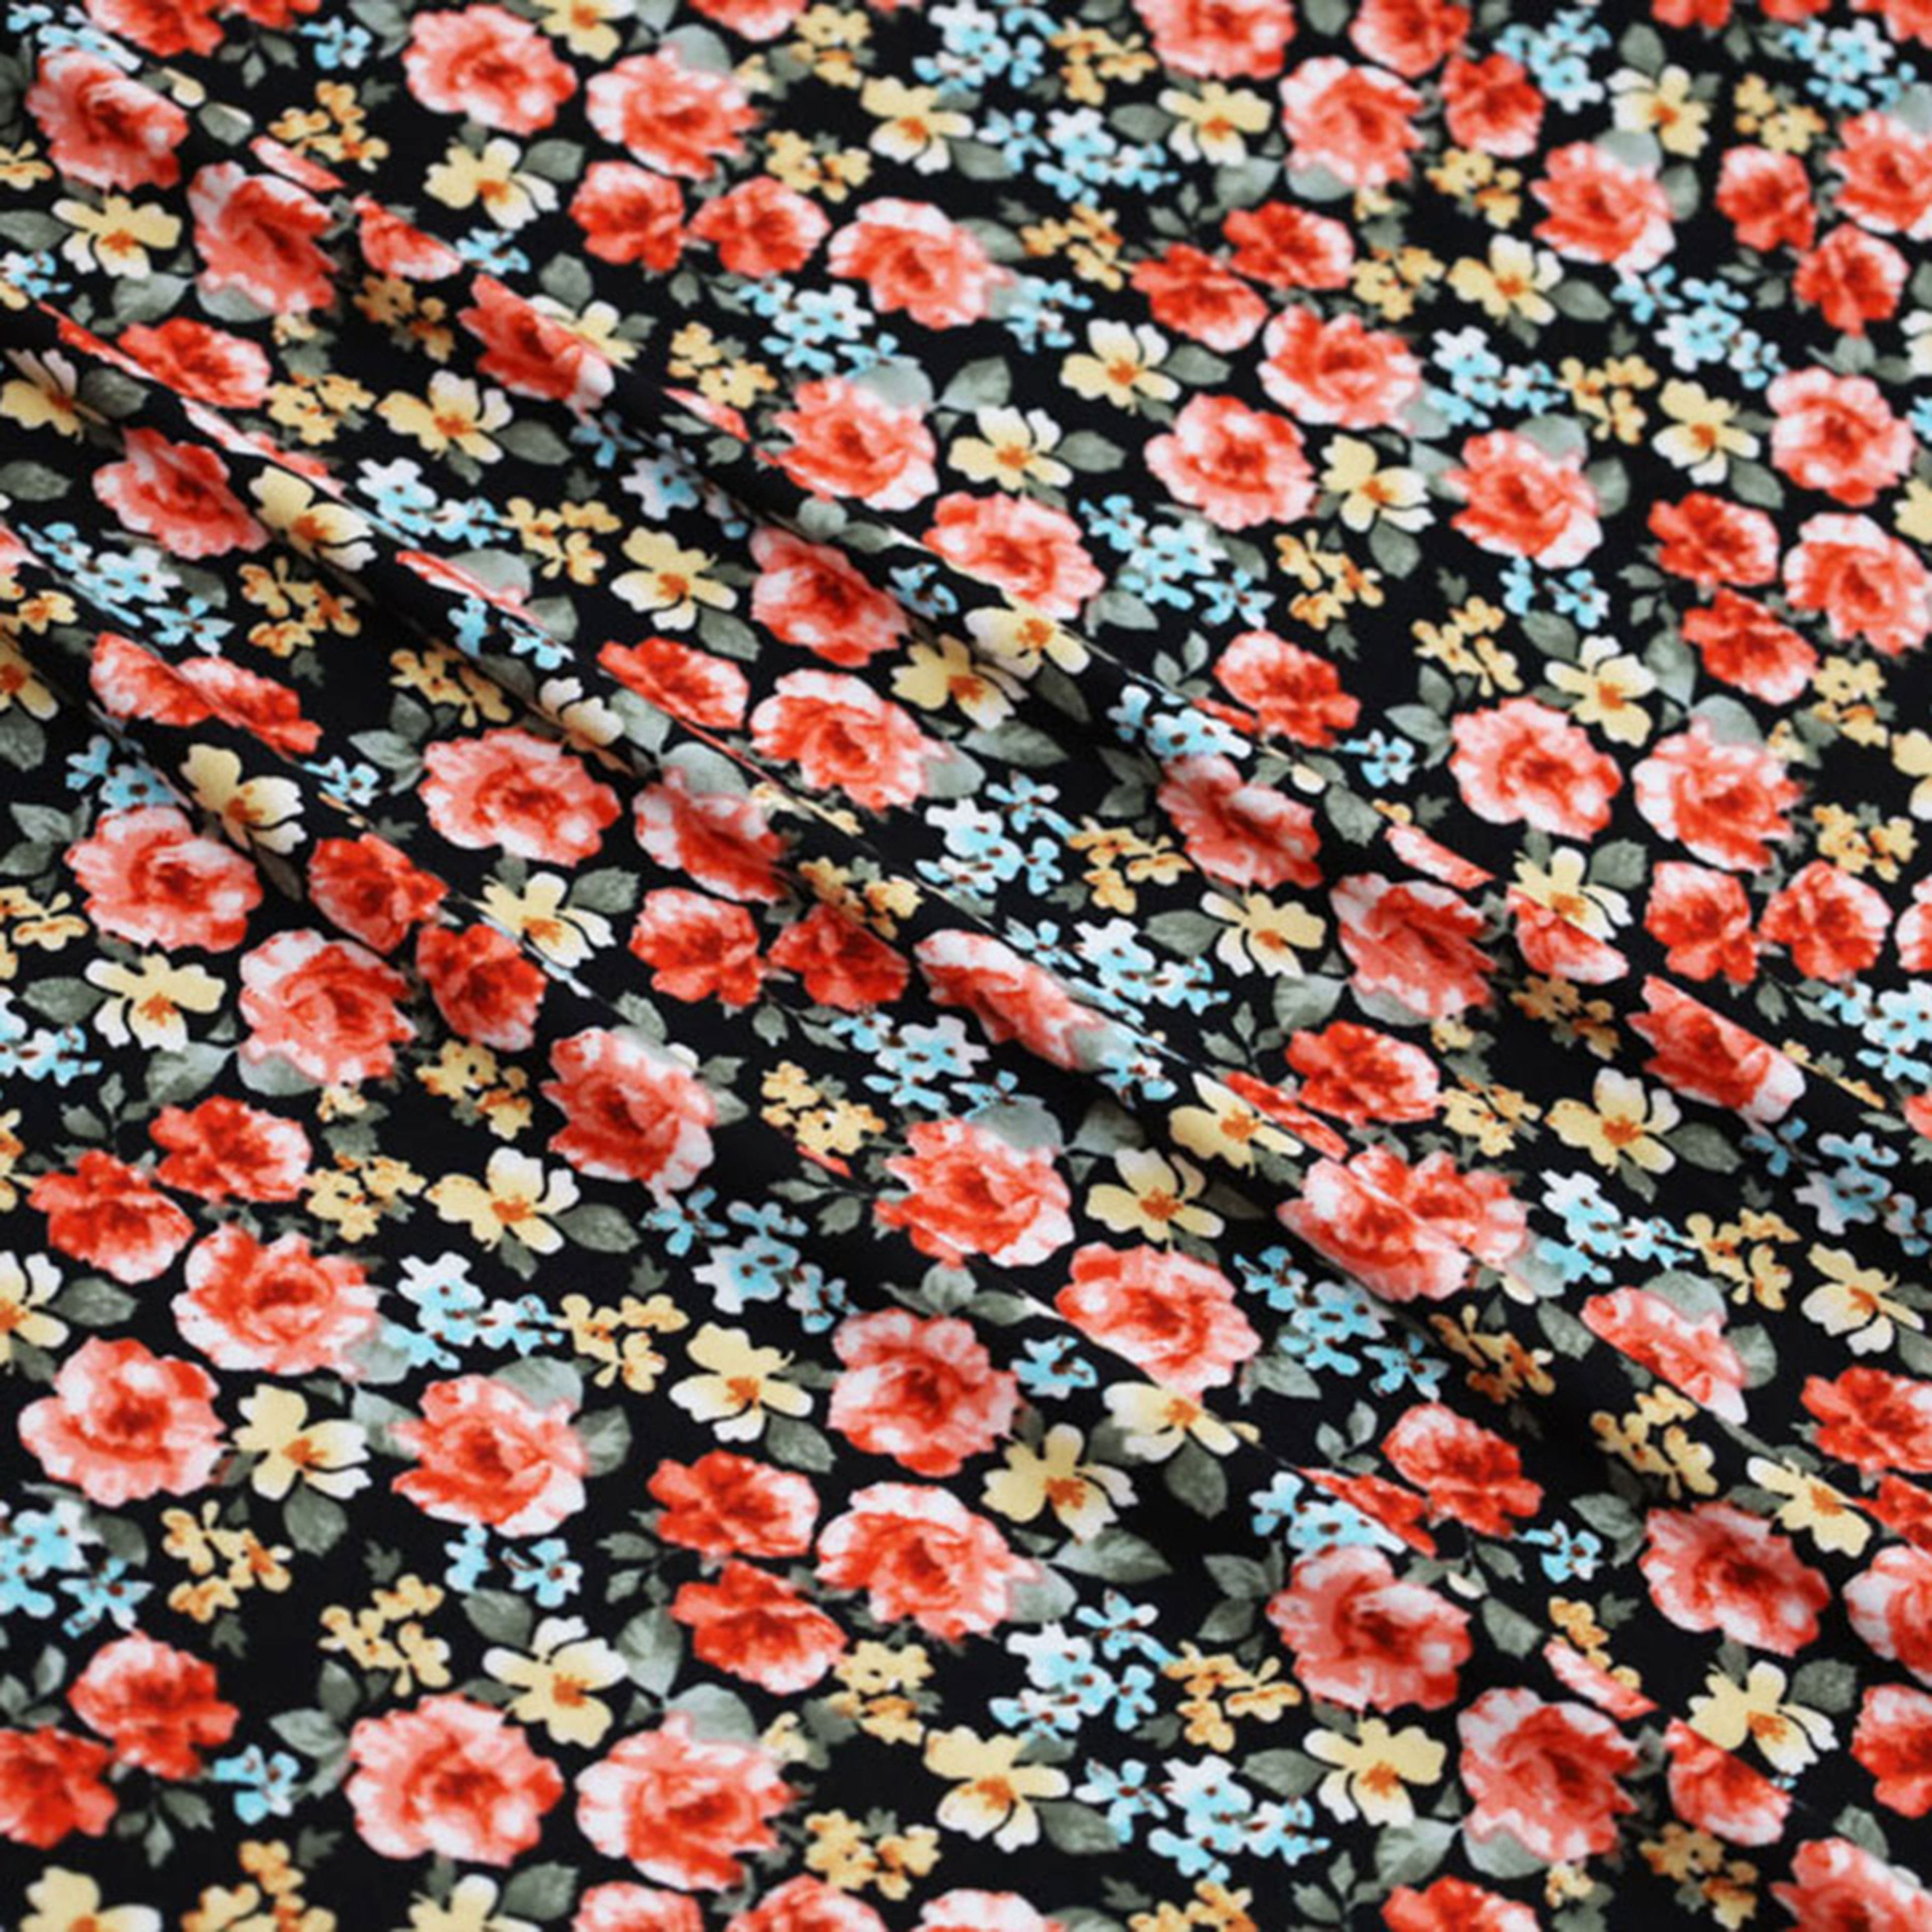 Fabric Merchants Flowers on Black Double Brushed Stretch Fabric